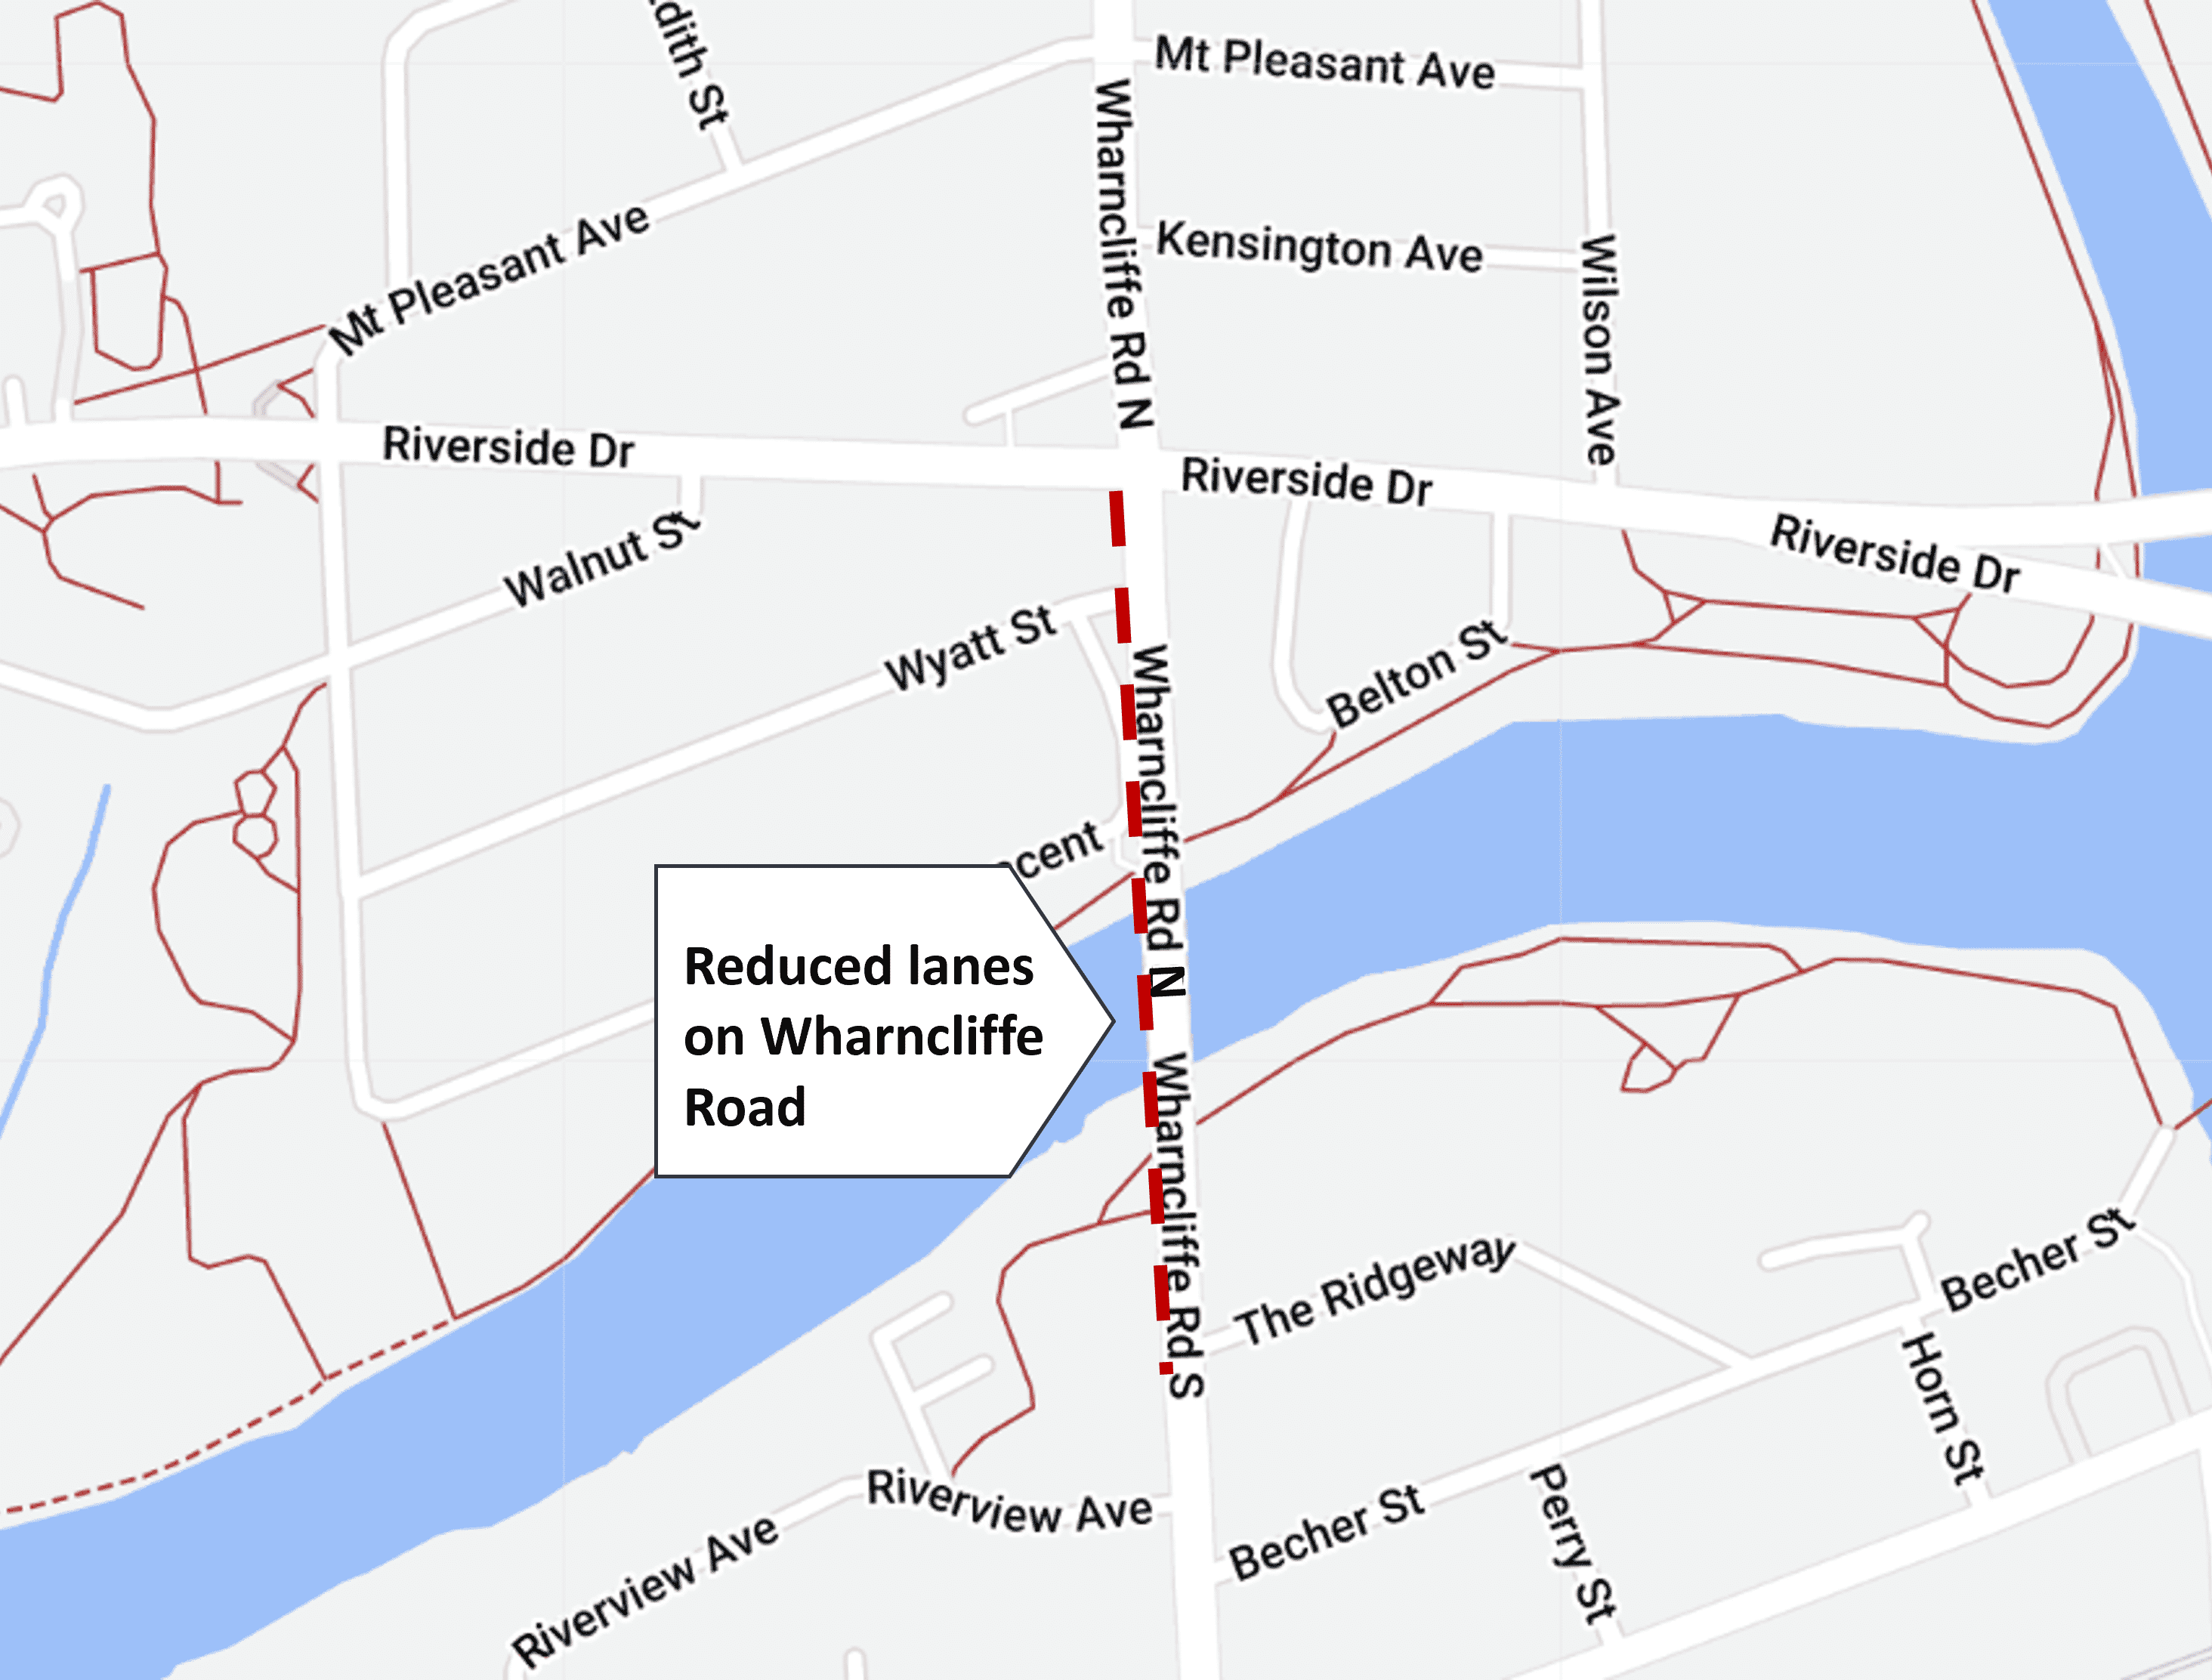 Reduced lanes on Wharncliffe (Thames River Bridge), south of Riverside Drive